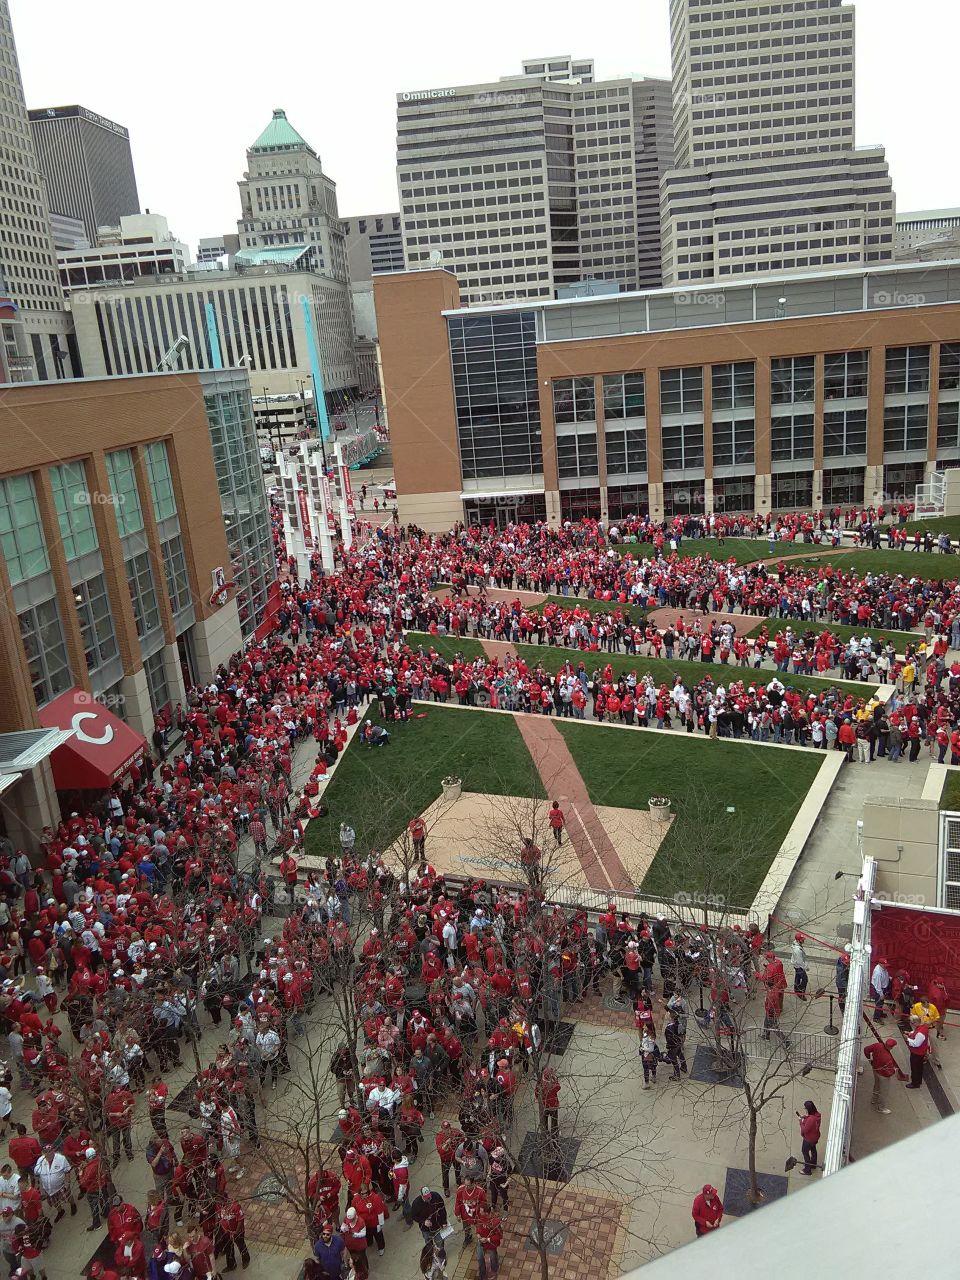 opening day at the reds